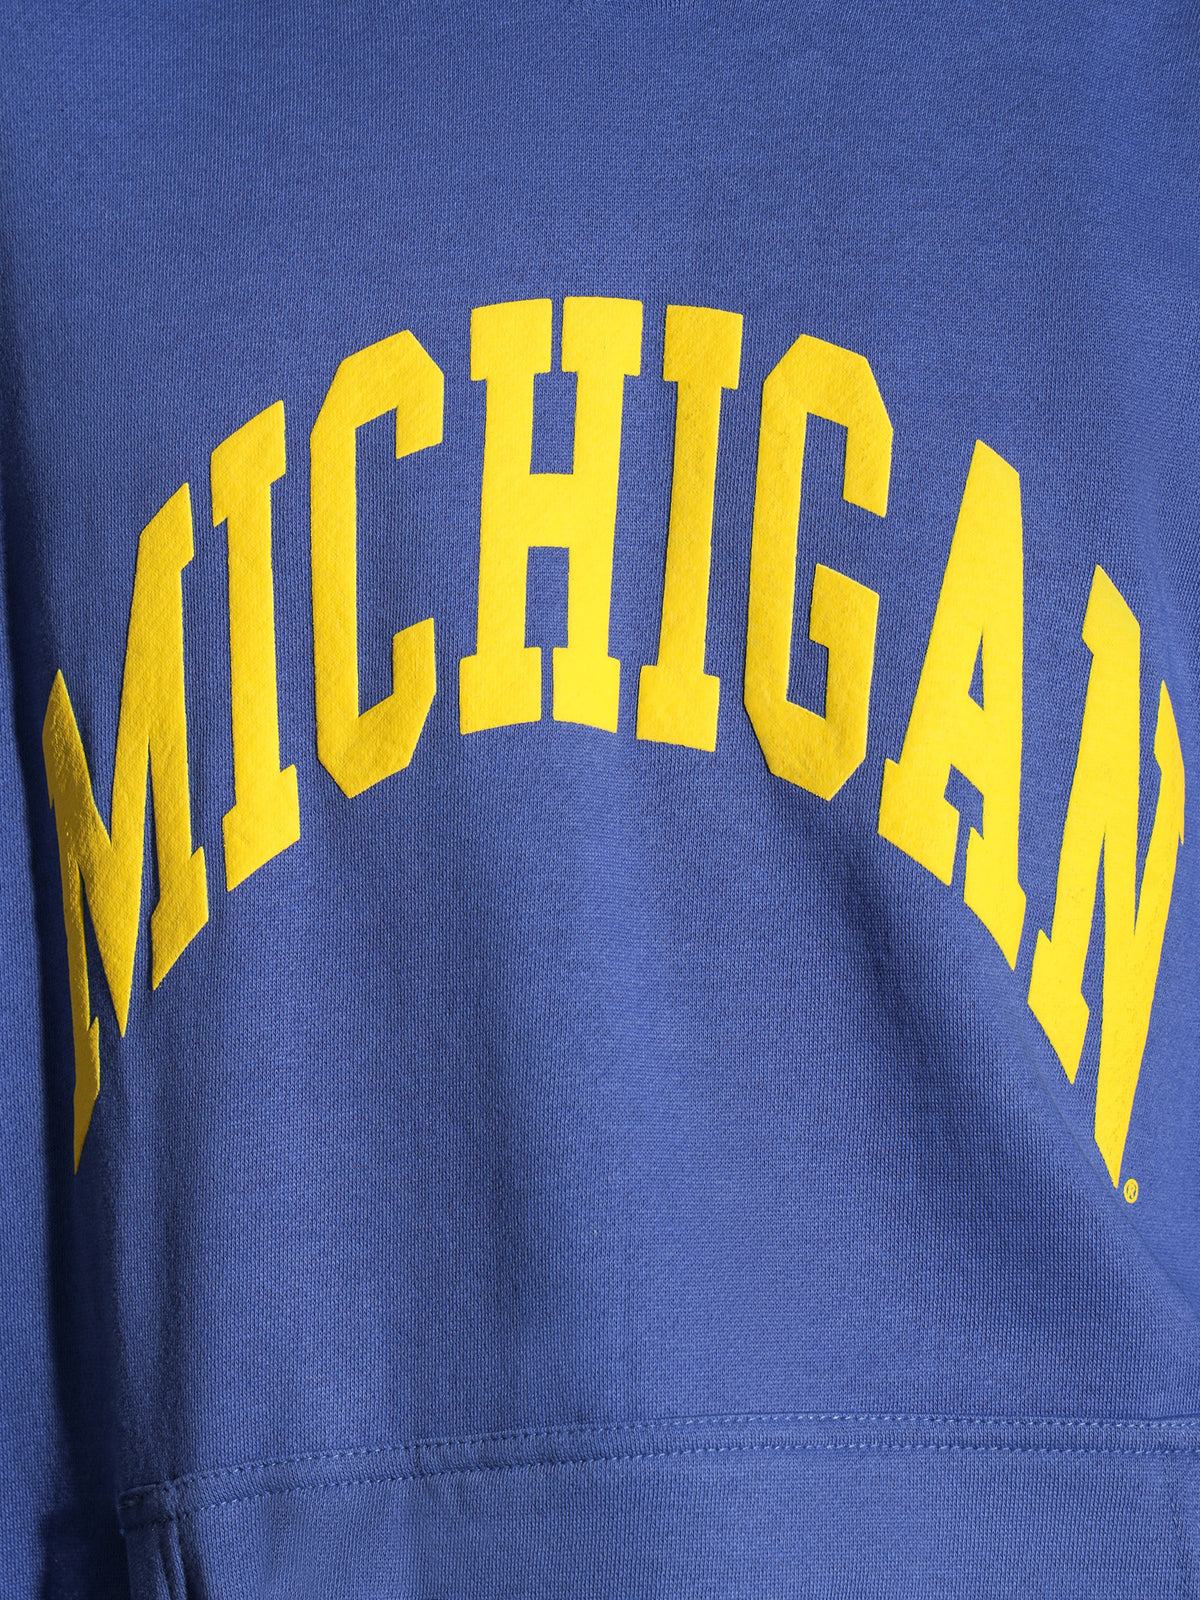 University Of Michigan Puff Print Pullover Hoodie in Royal Blue